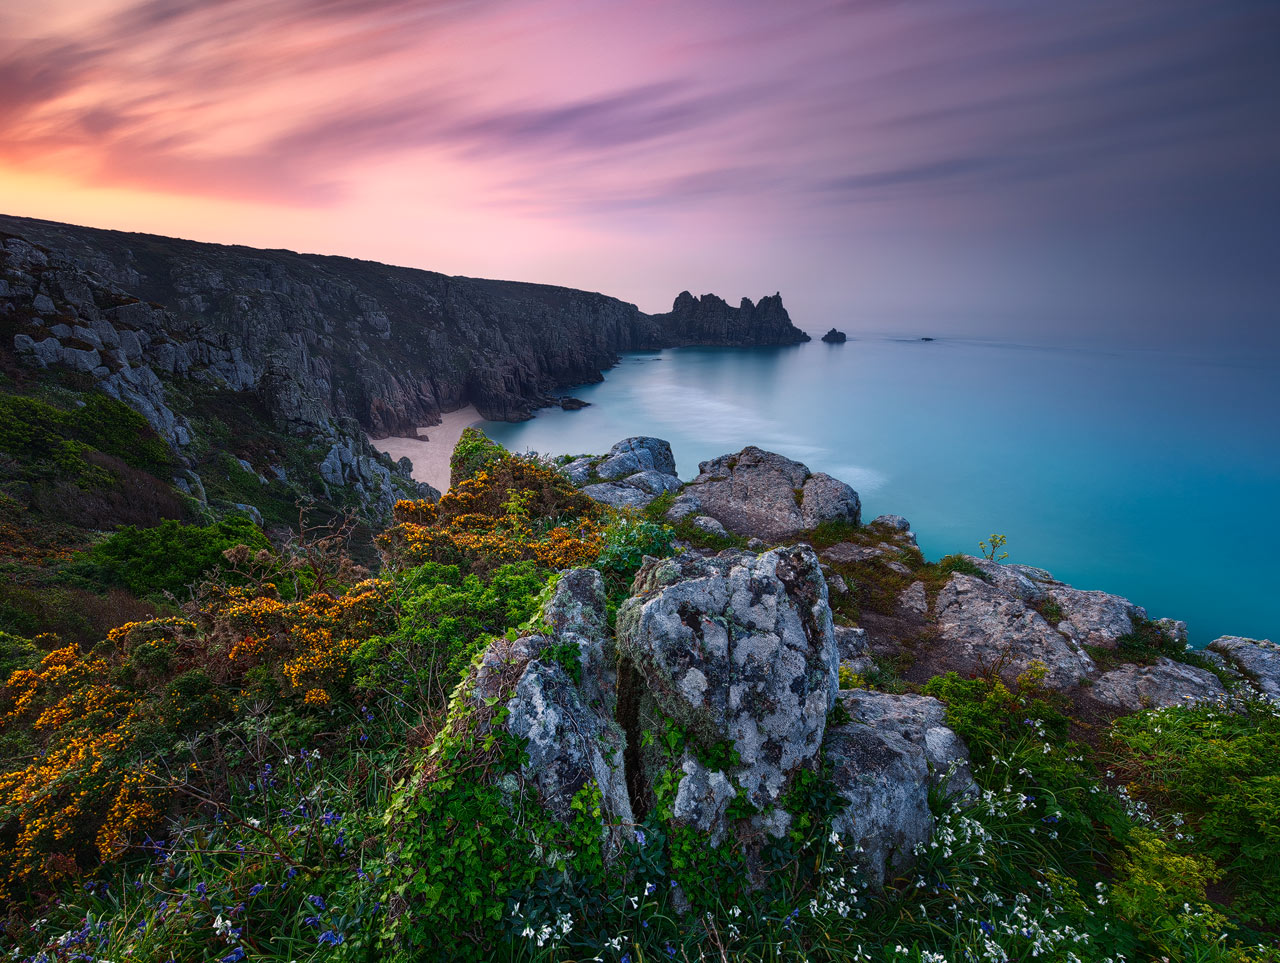 Beautiful sunrise at Pednvounder Beach with a spectacular view along the cornish cliffs.